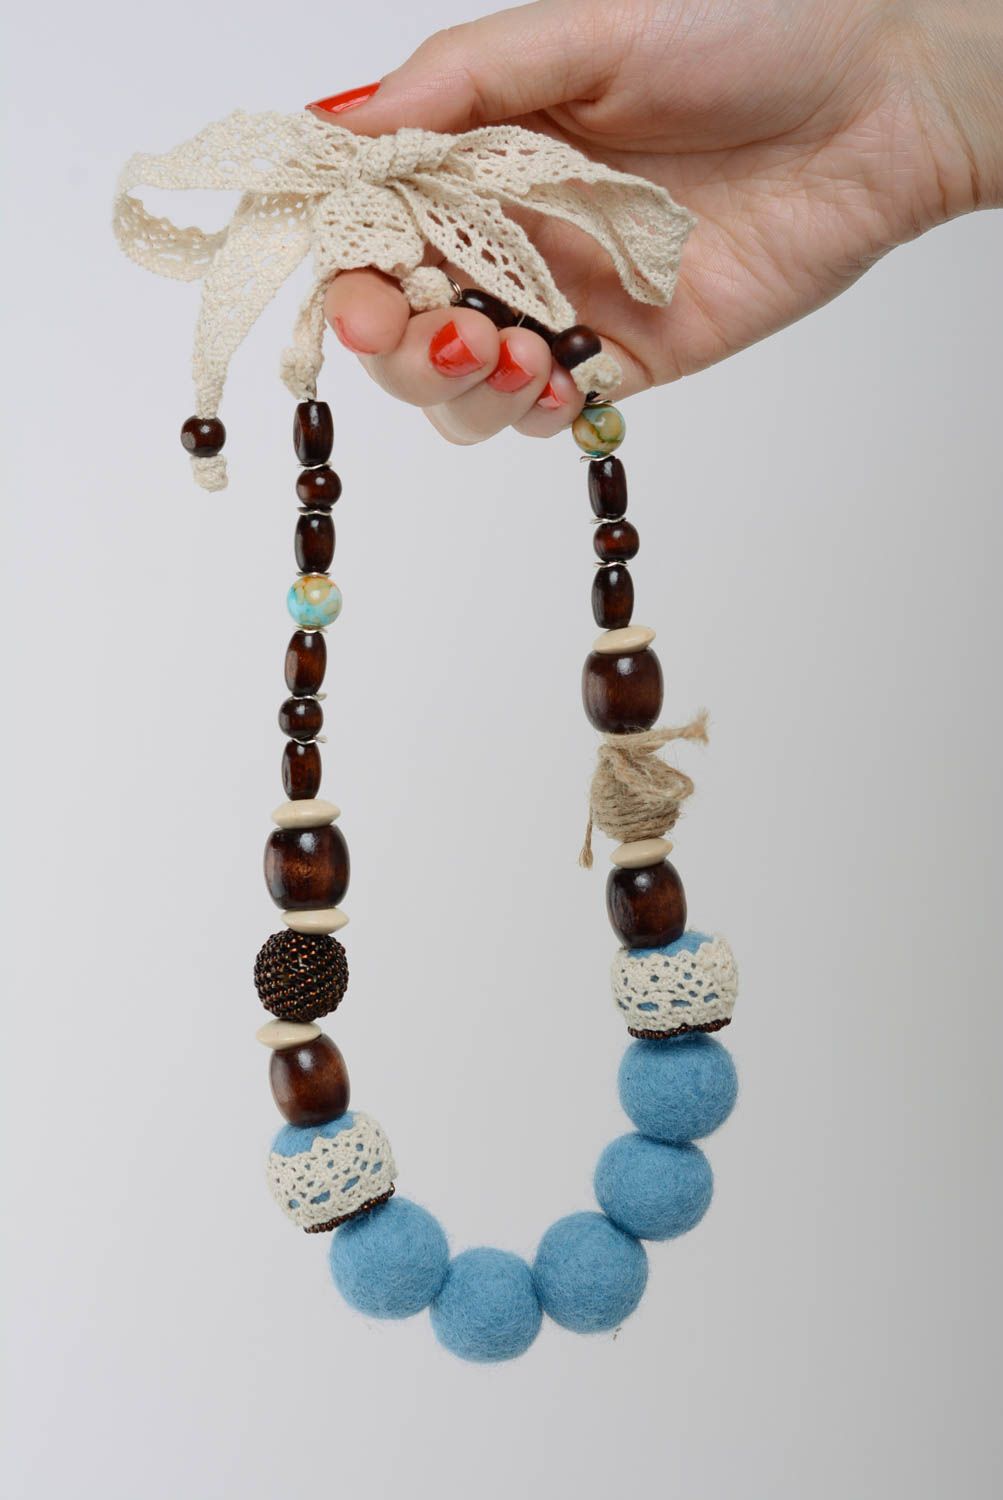 Handmade blue felted wool bead necklace with wooden beads and light lace photo 2